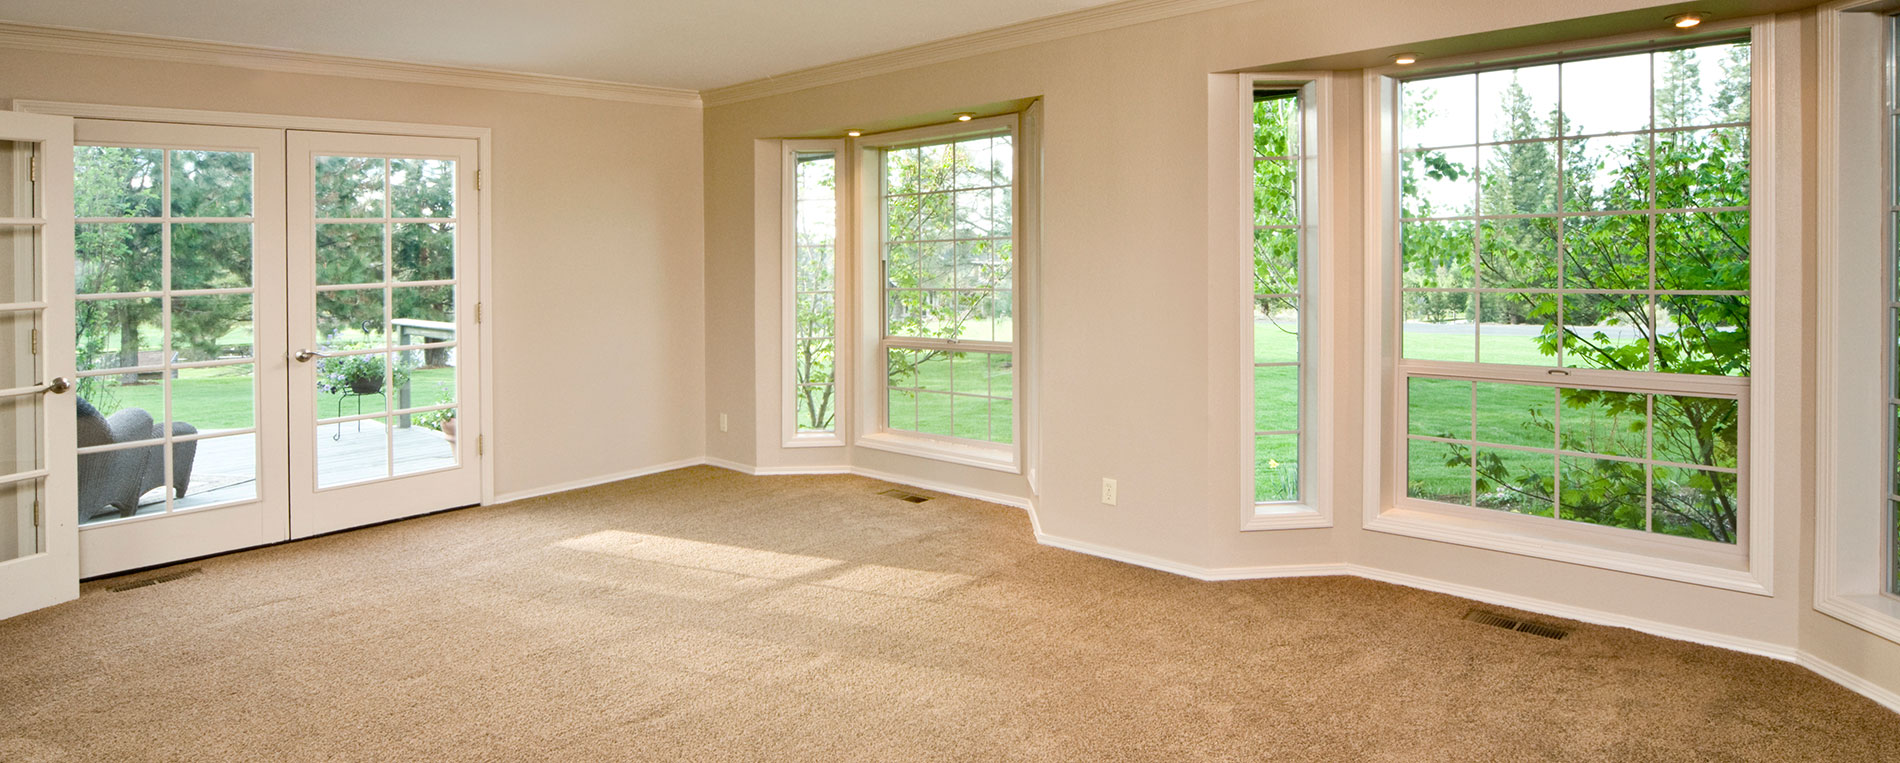 Affordable Carpet Stain Removal, Laguna Niguel